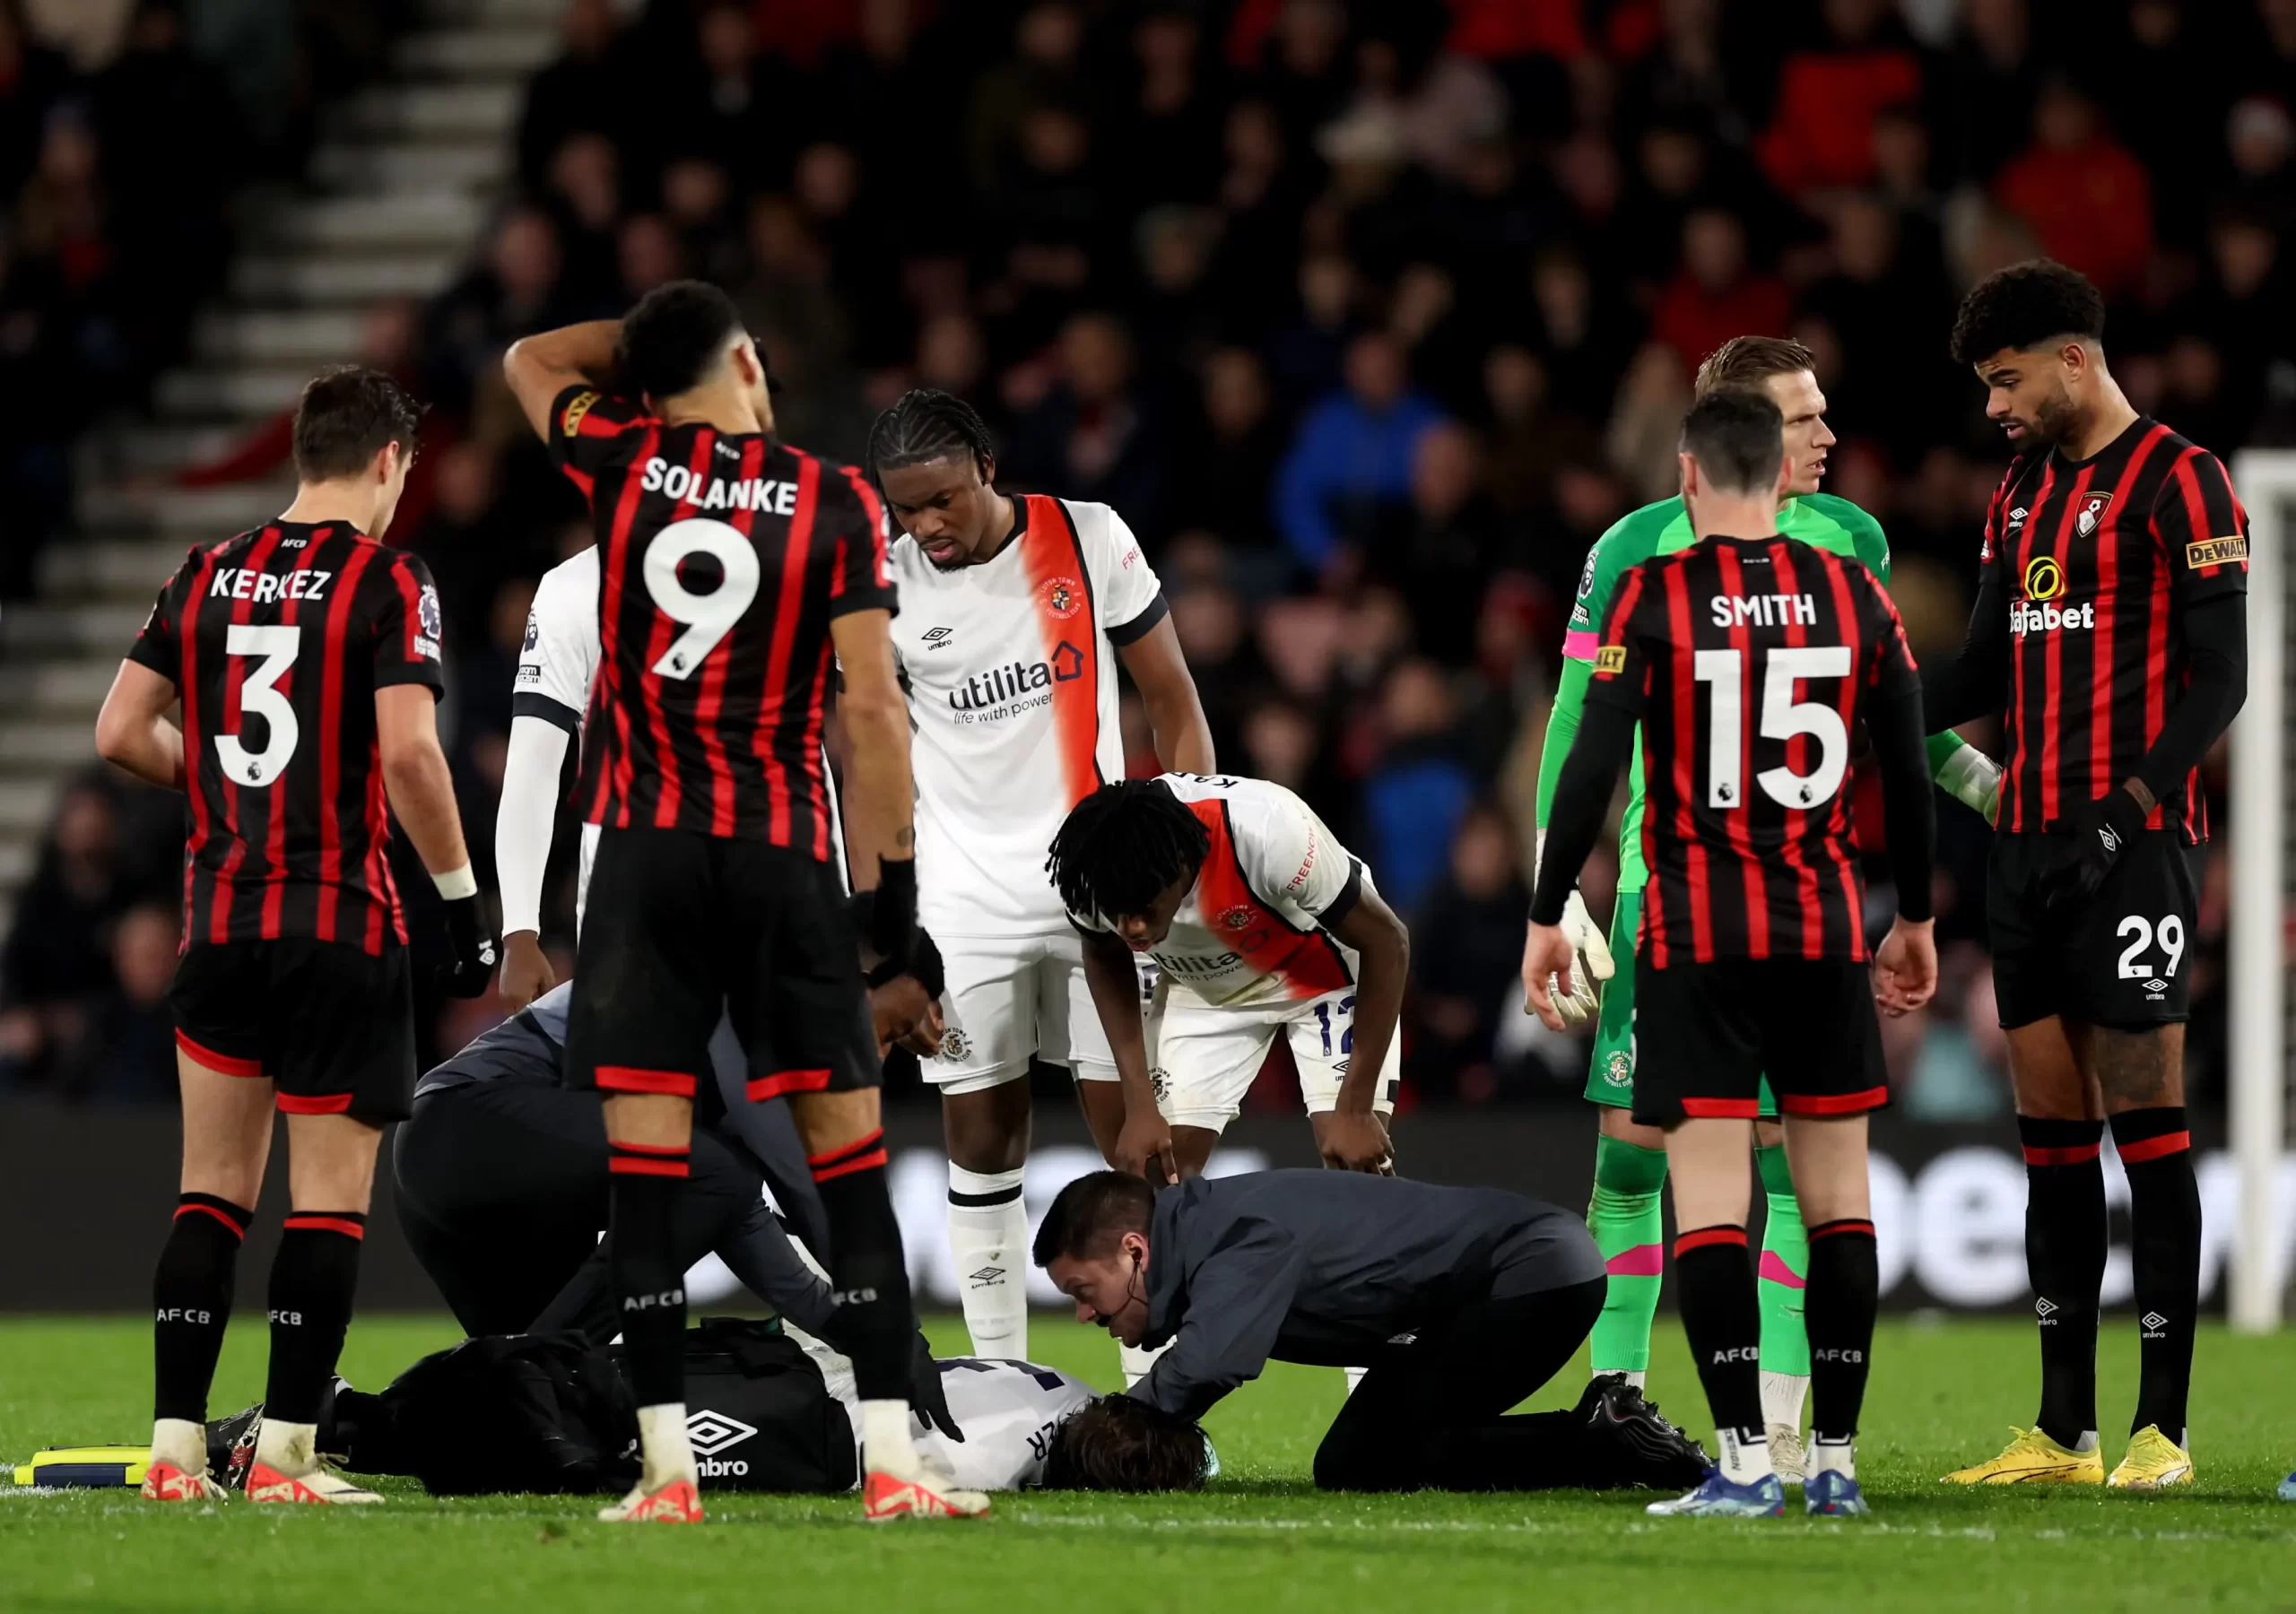 Luton Town and Bournemouth players around Tom Lockyer after he suffered a cardiac arrest mid game